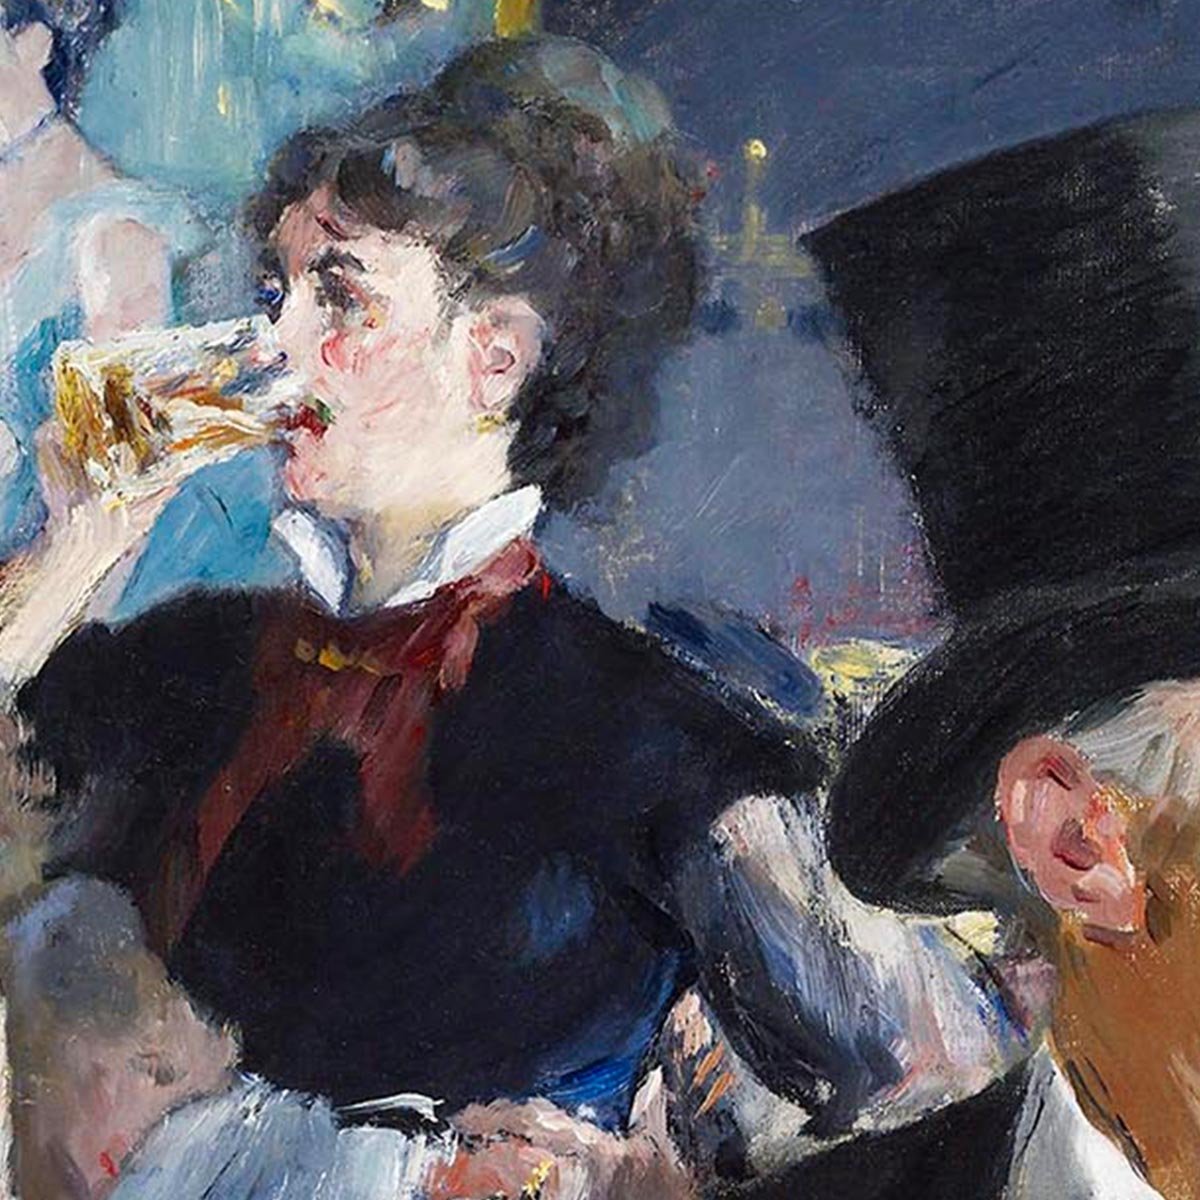 The Café Concert by Manet Exhibition Poster